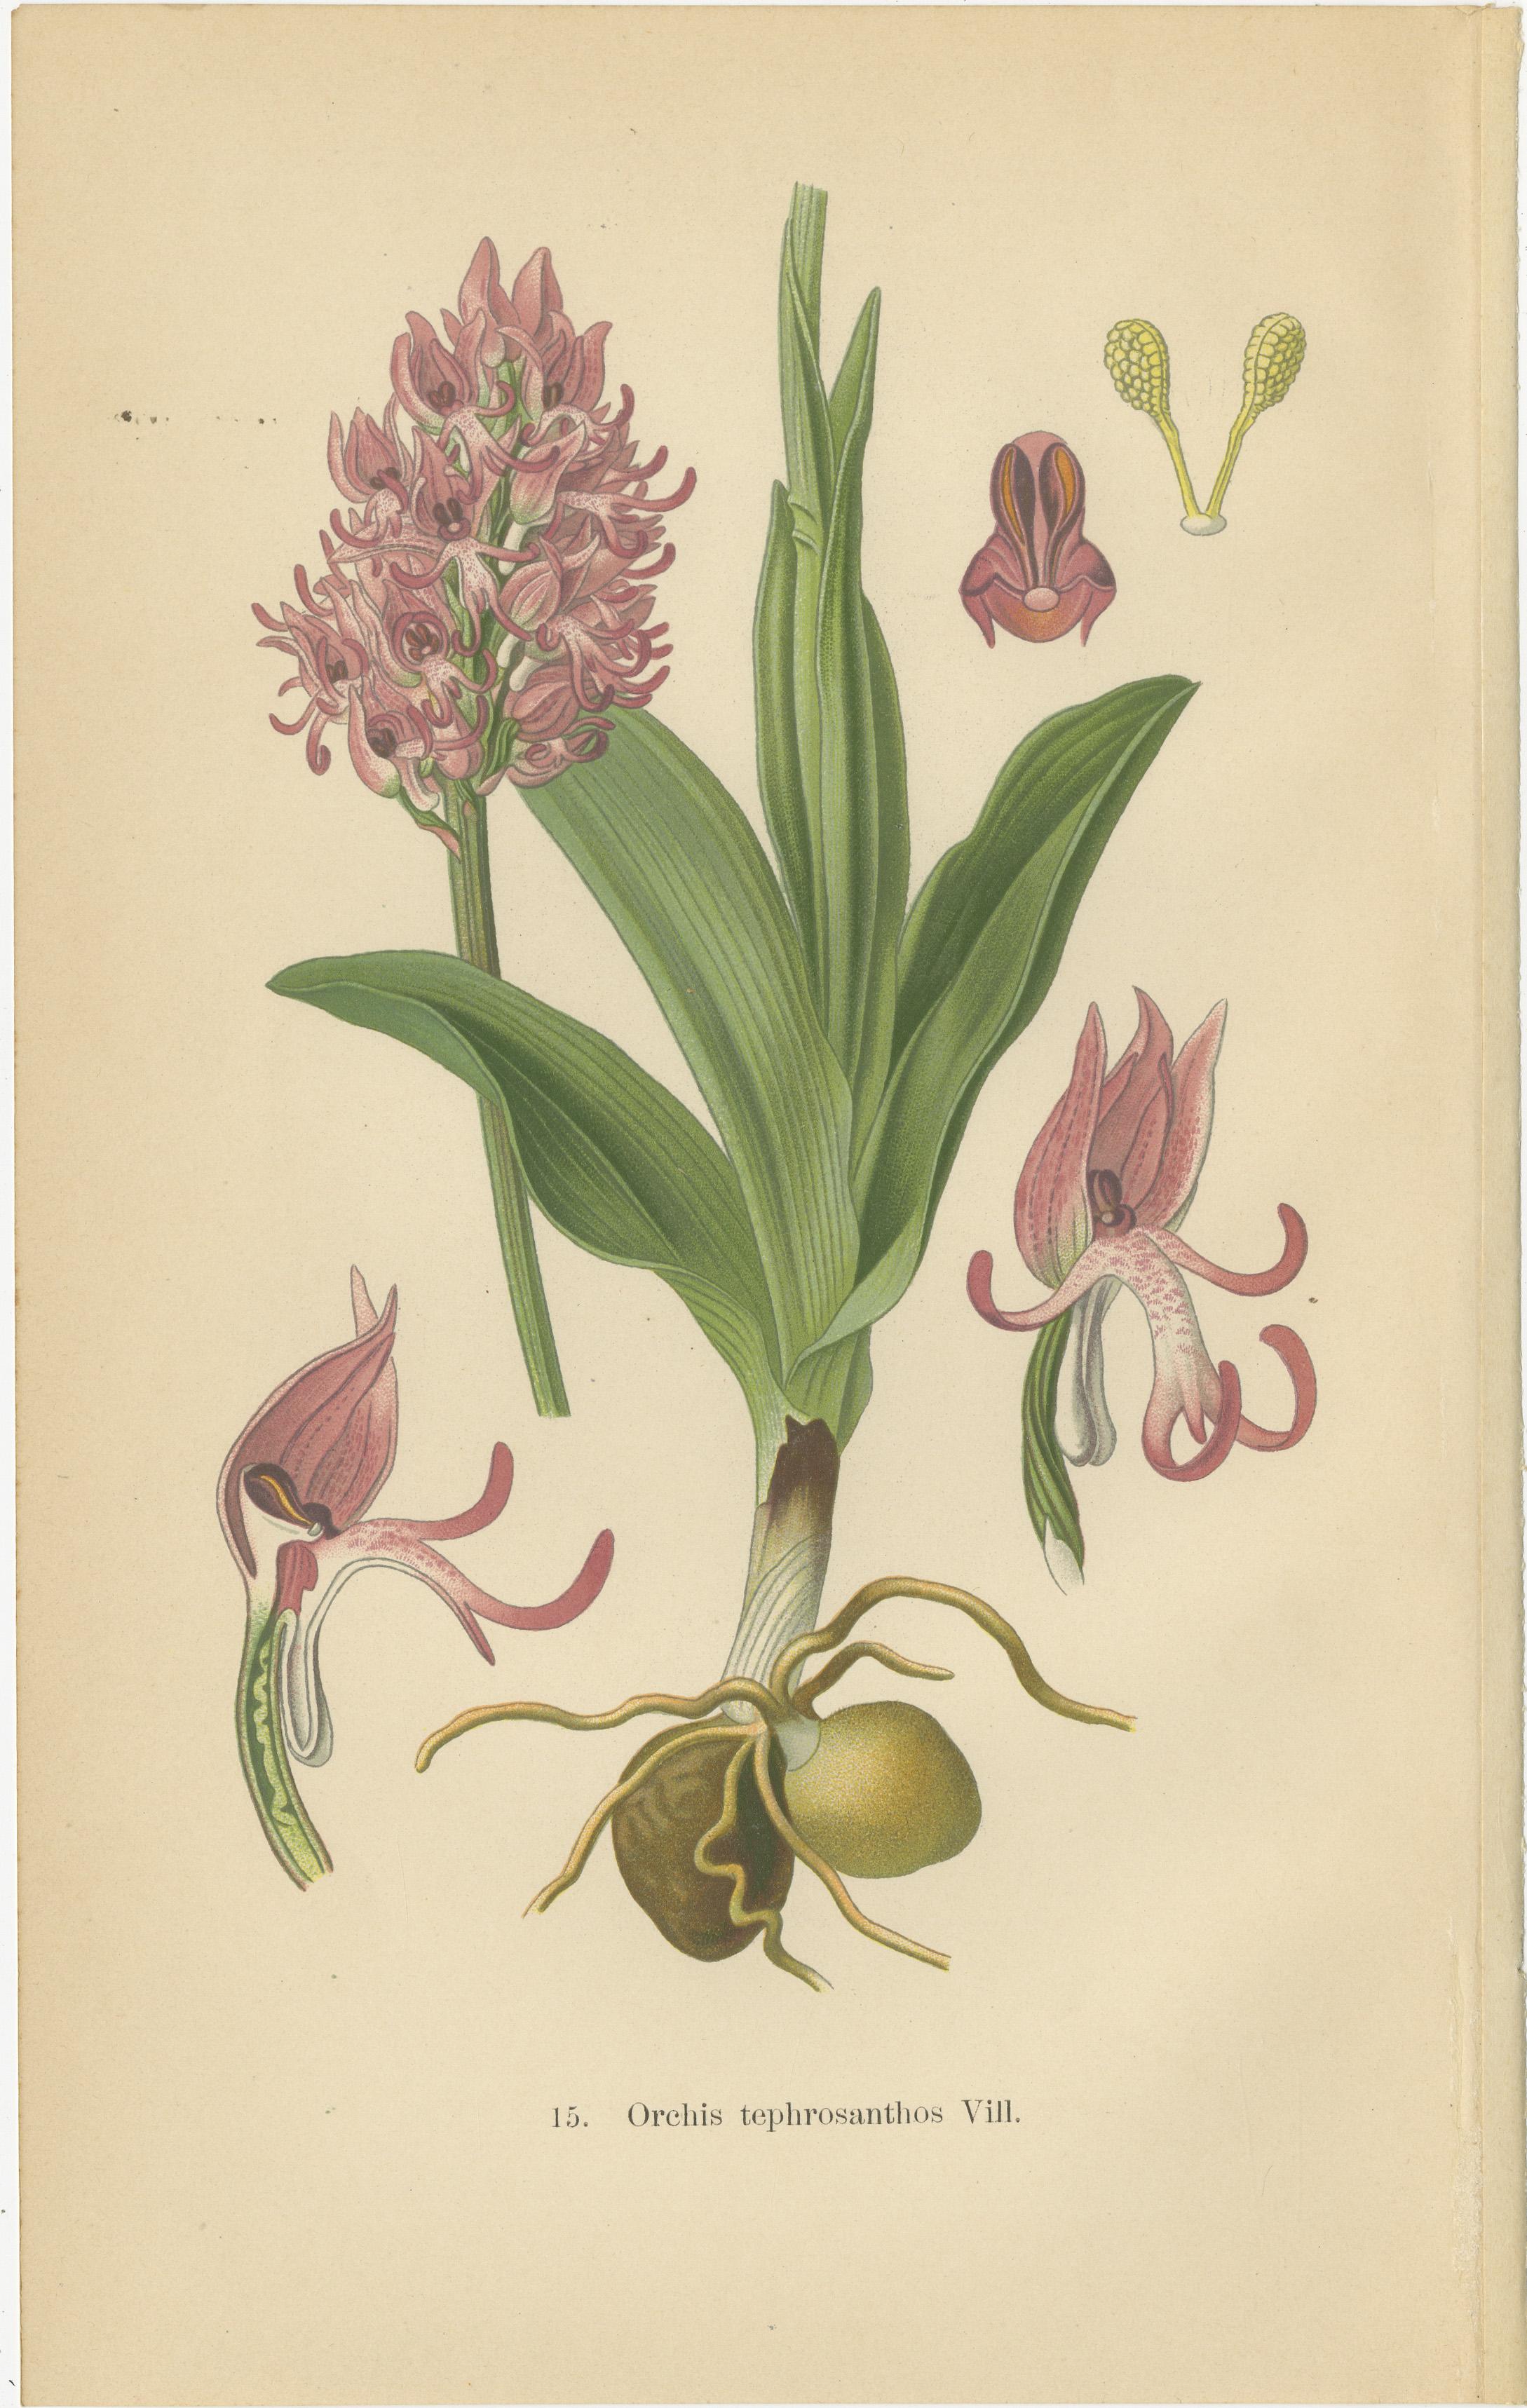 This original antique collage brings together two botanical prints from Walter Müller's 1904 publication, which meticulously cataloged orchid species in Germany and the surrounding areas. 

The first illustration features 